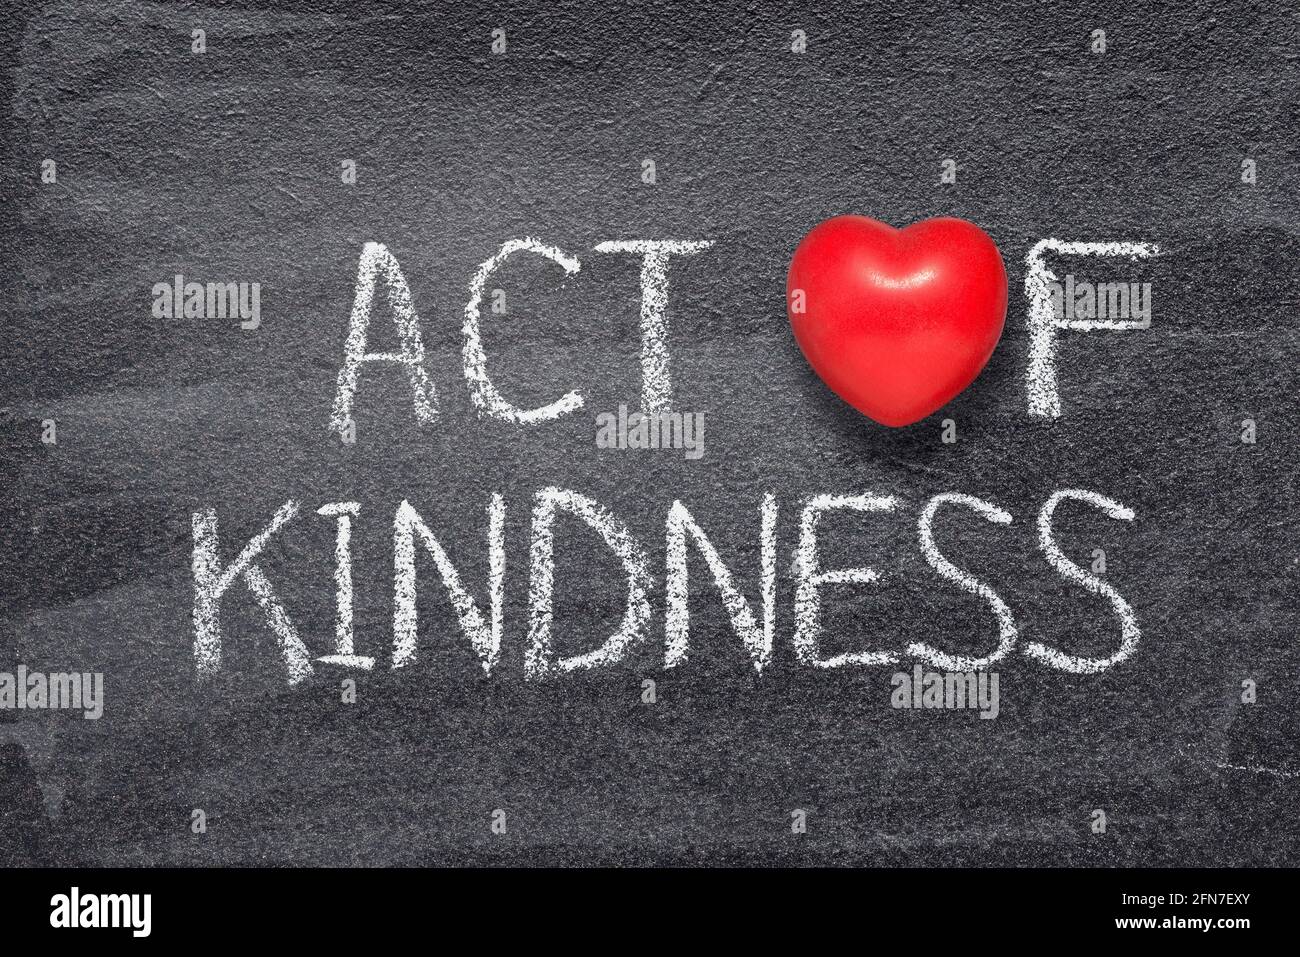 act of kindness phrase written on chalkboard with red heart symbol ...